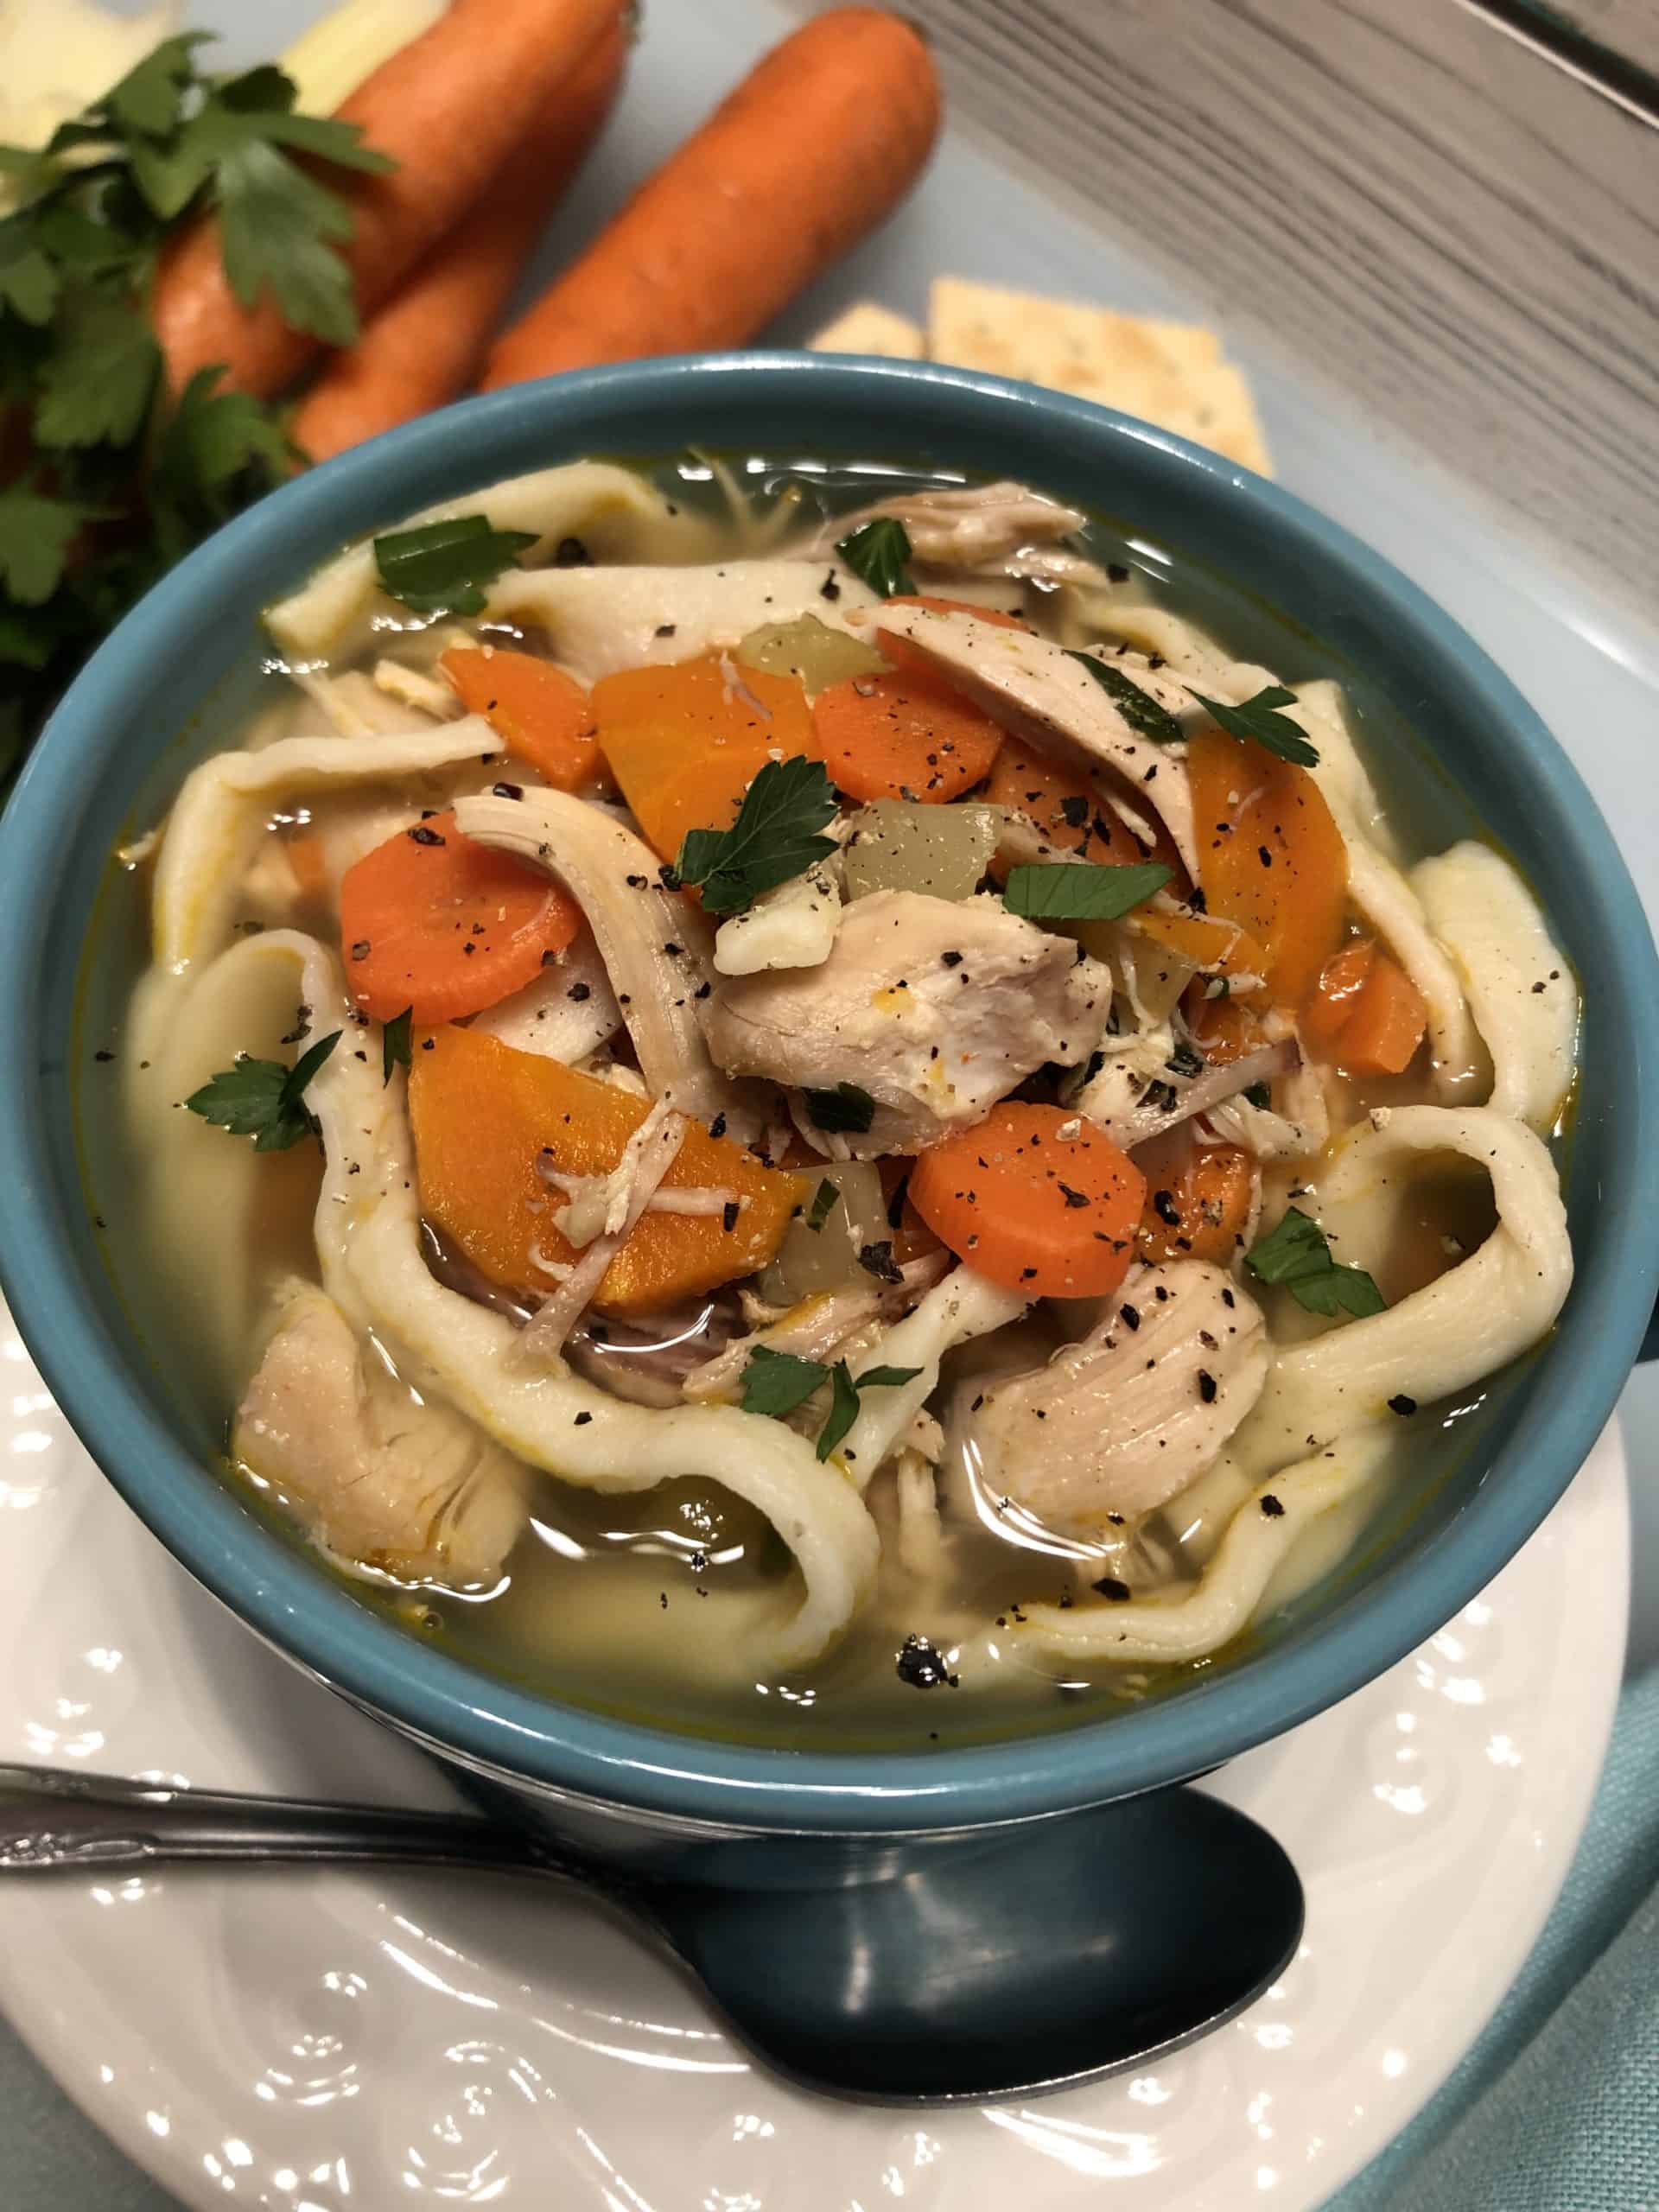 Chicken soup with homemade noodles.